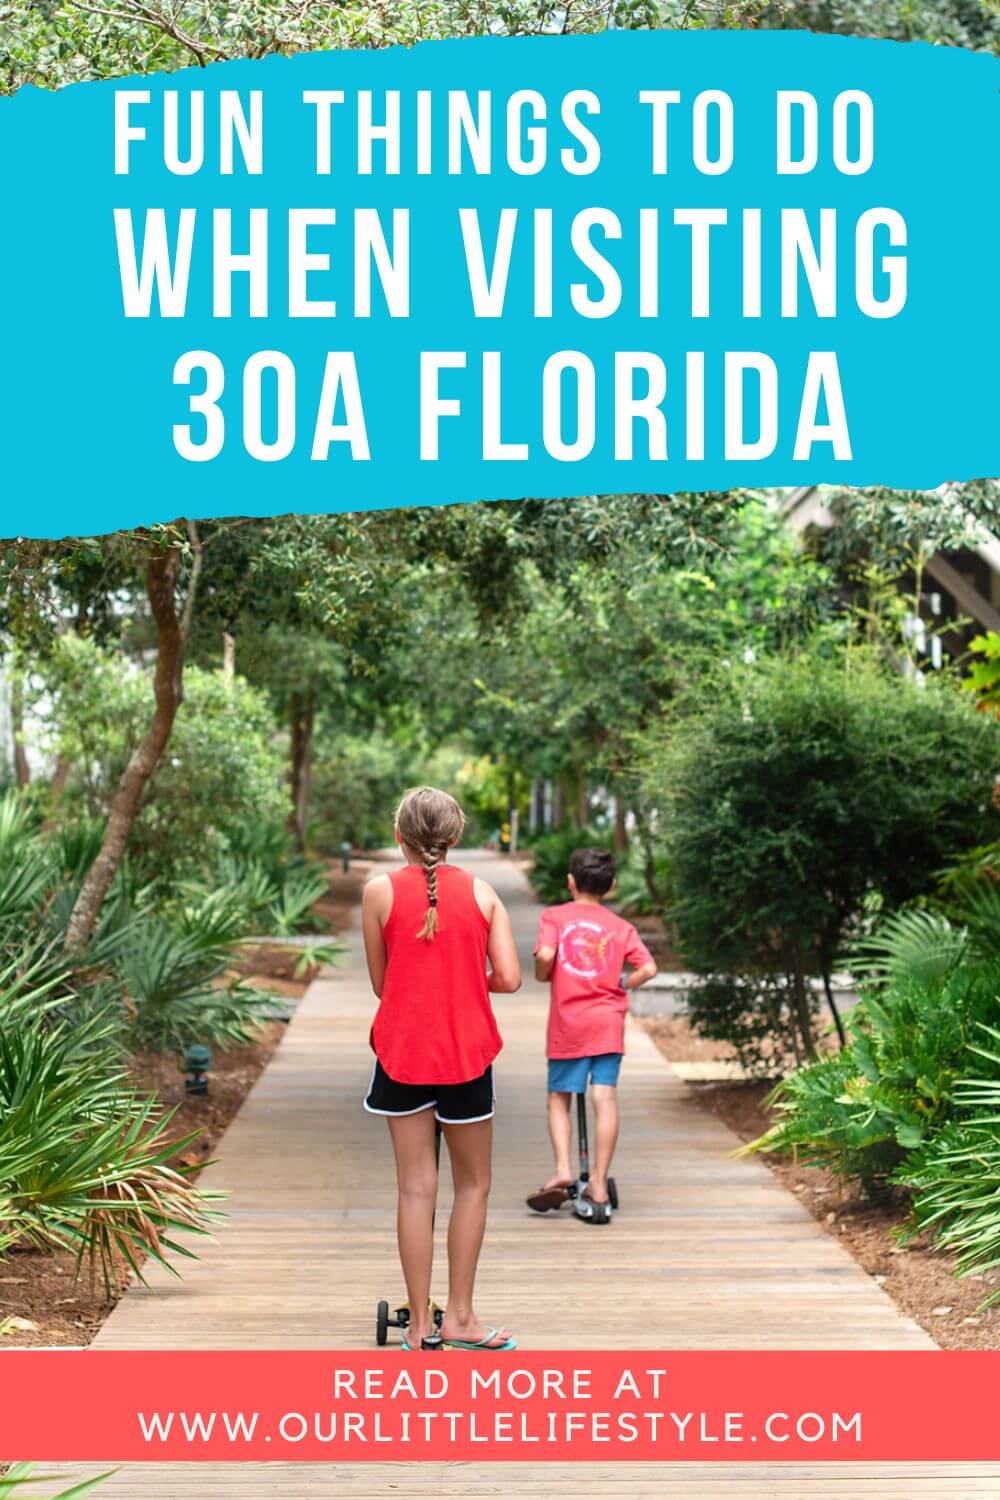 Fun Things to do on 30A with Kids